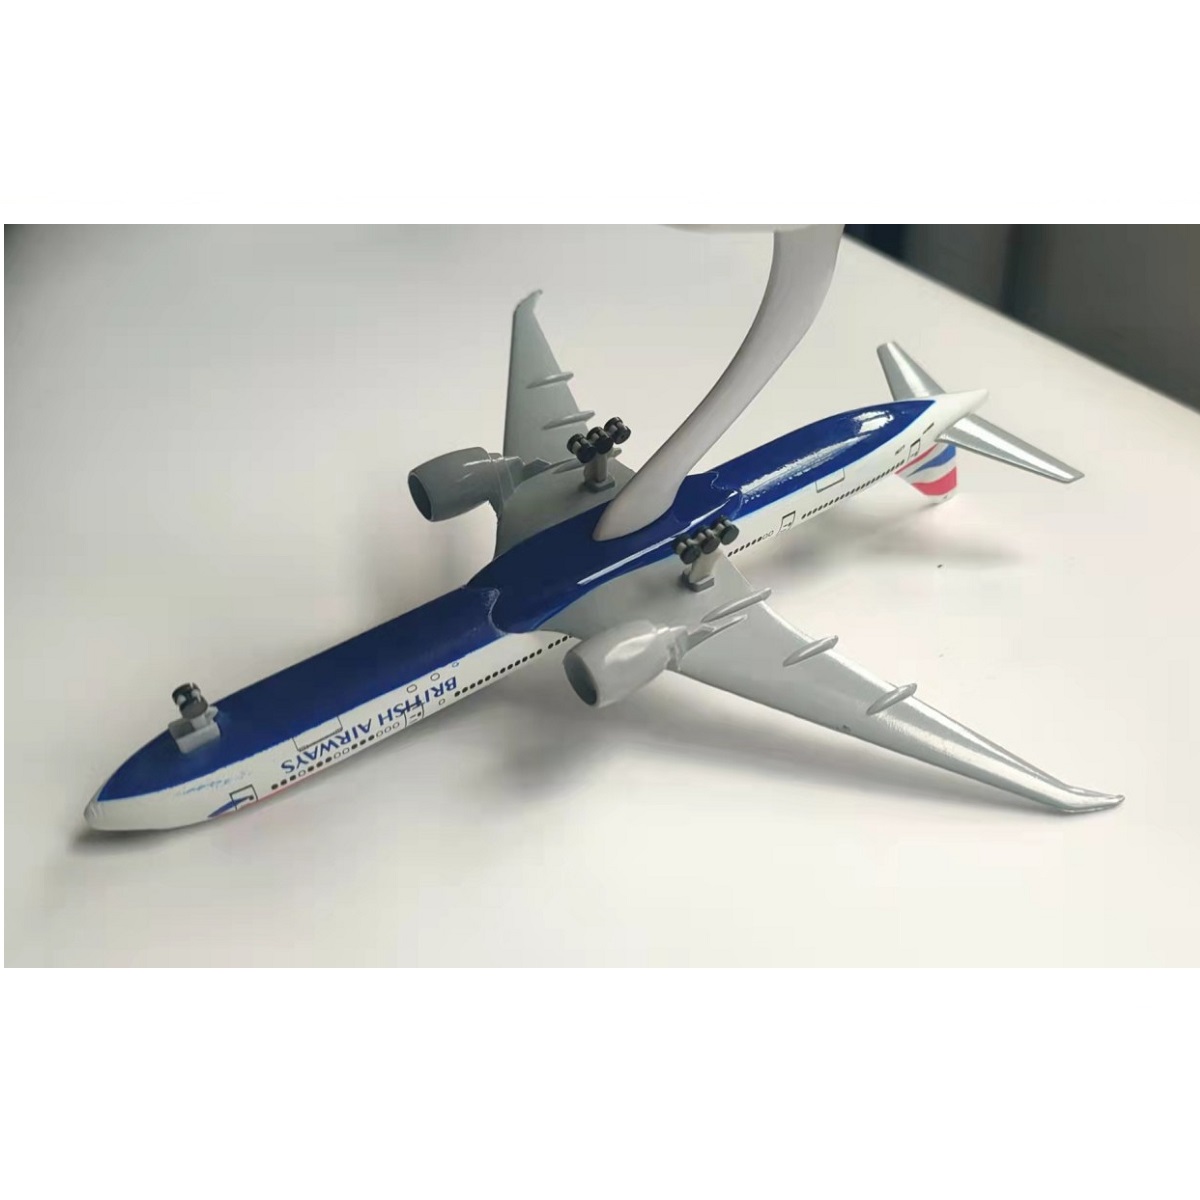 British Airways Airbus A380 Replica Toy Model with Stand